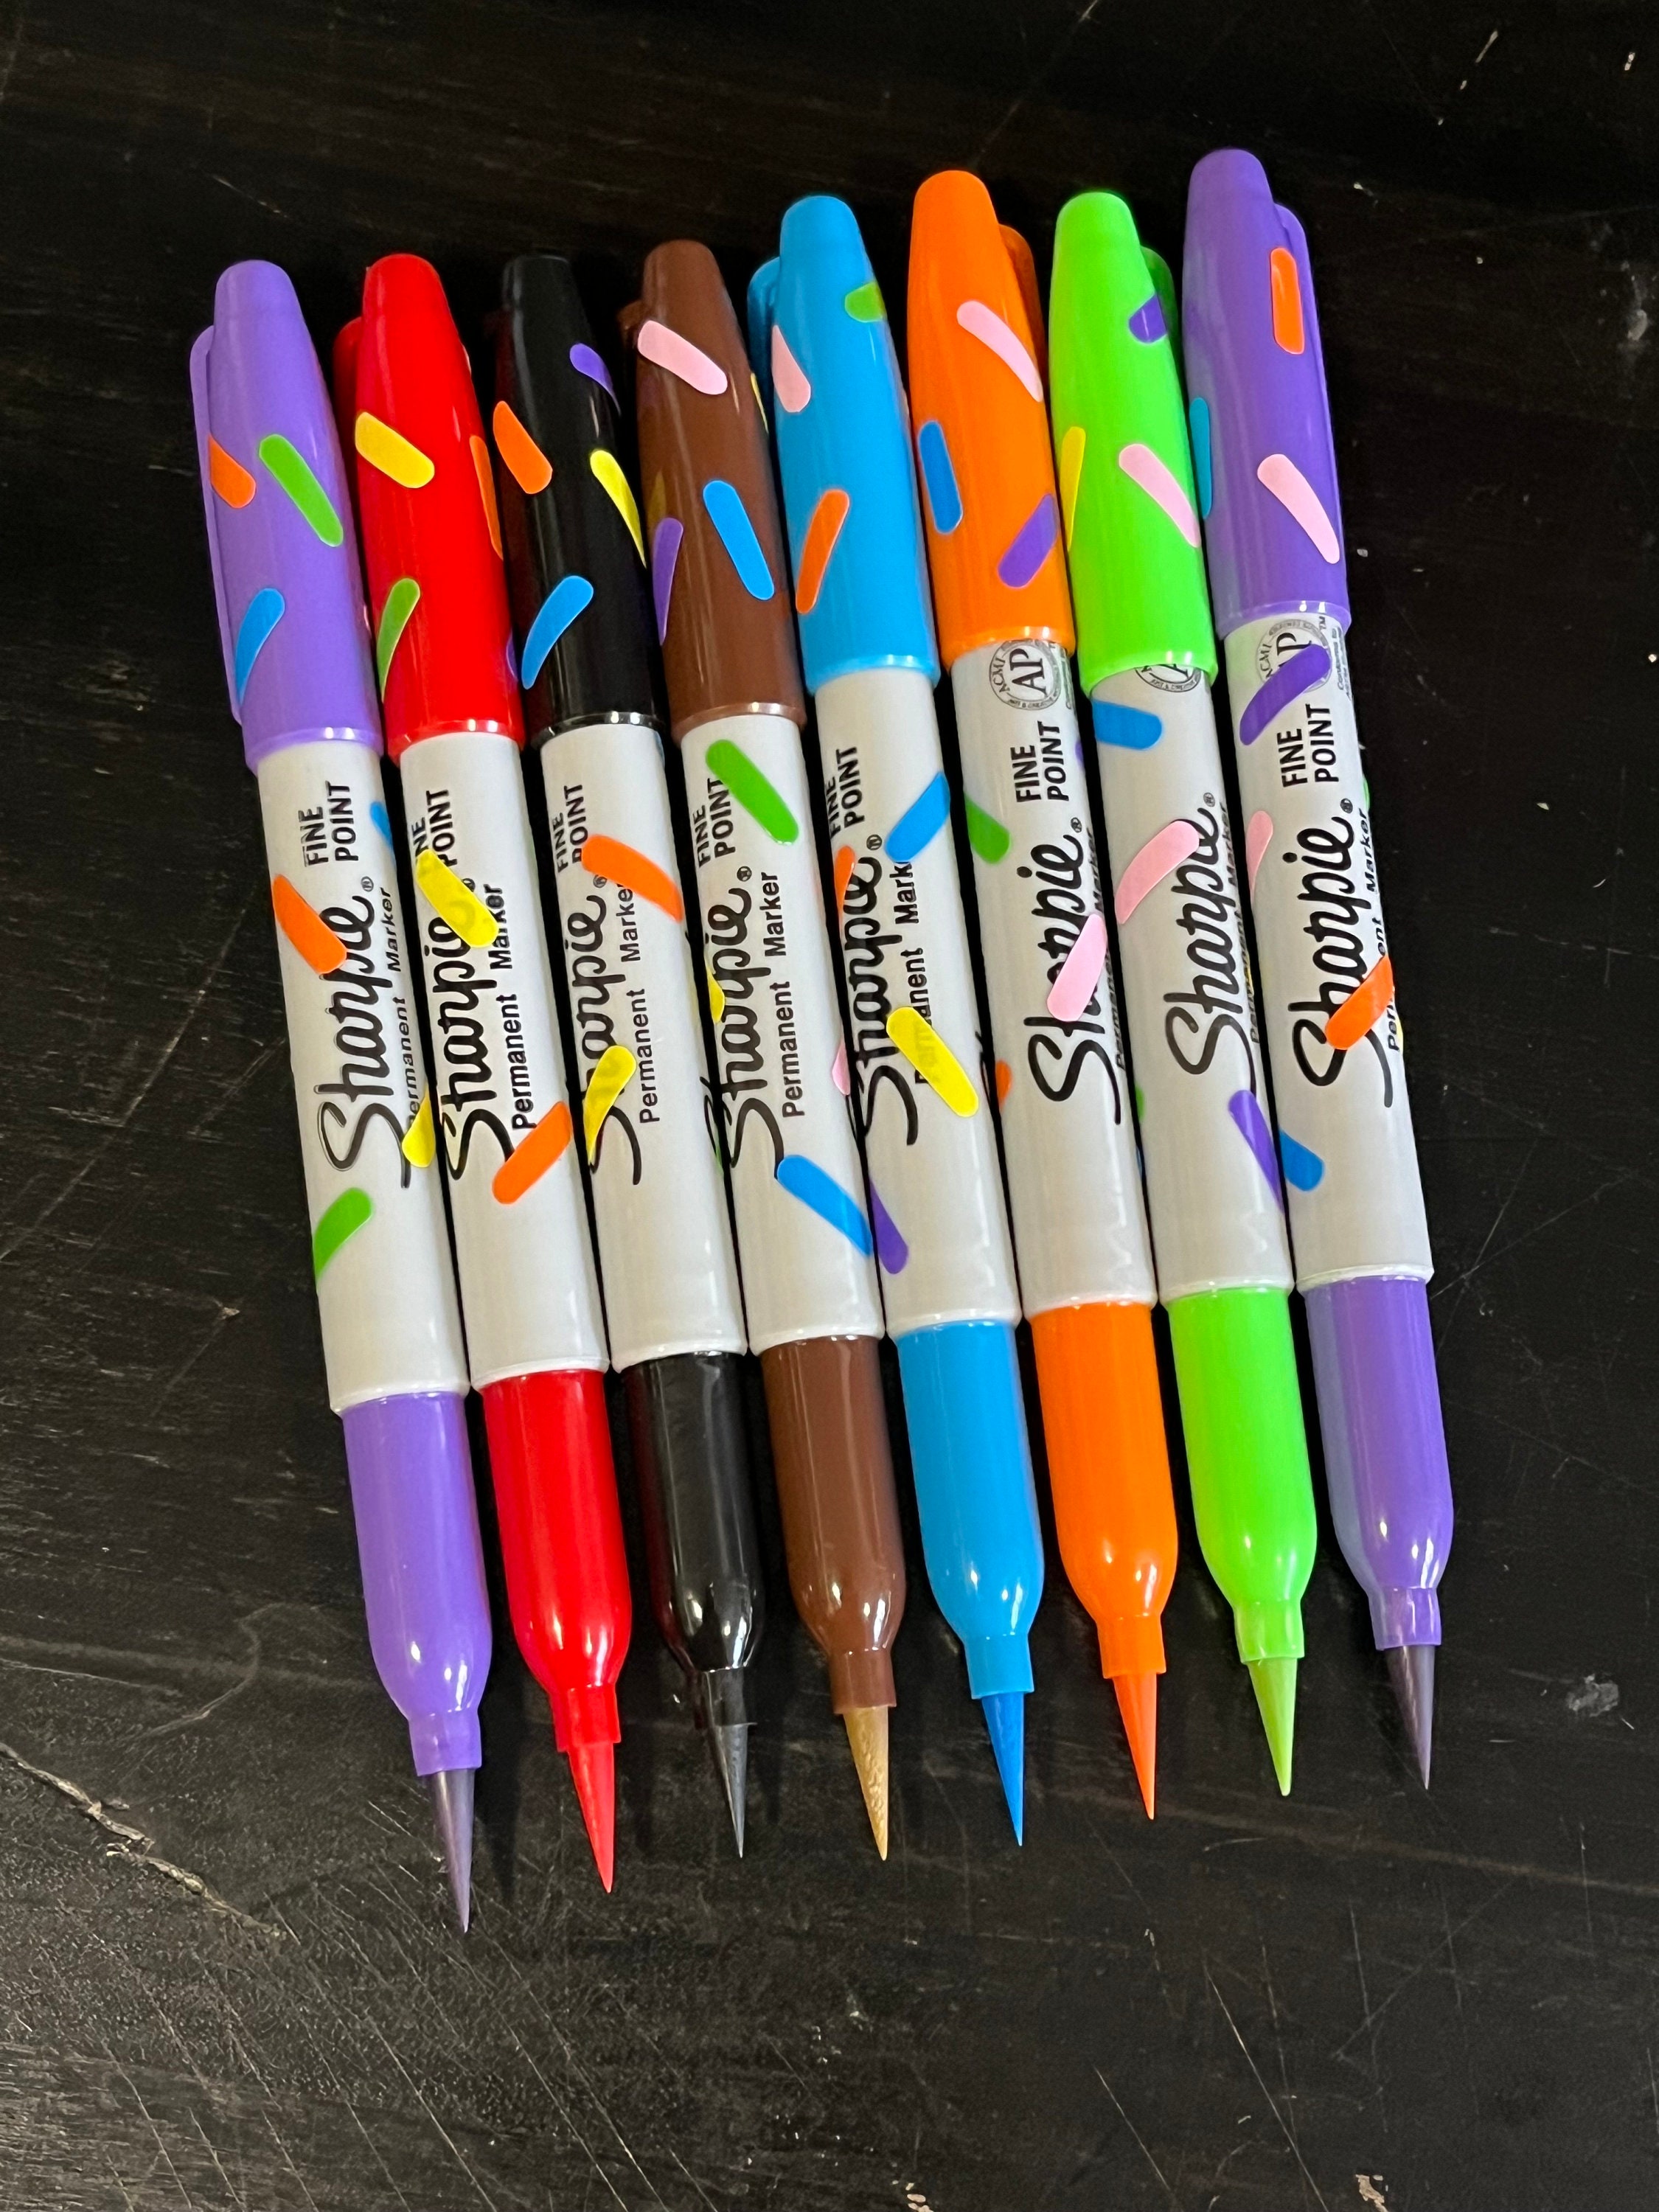 1 Each Sharpie Permanent Markers, Metalic Fine Point / Painting